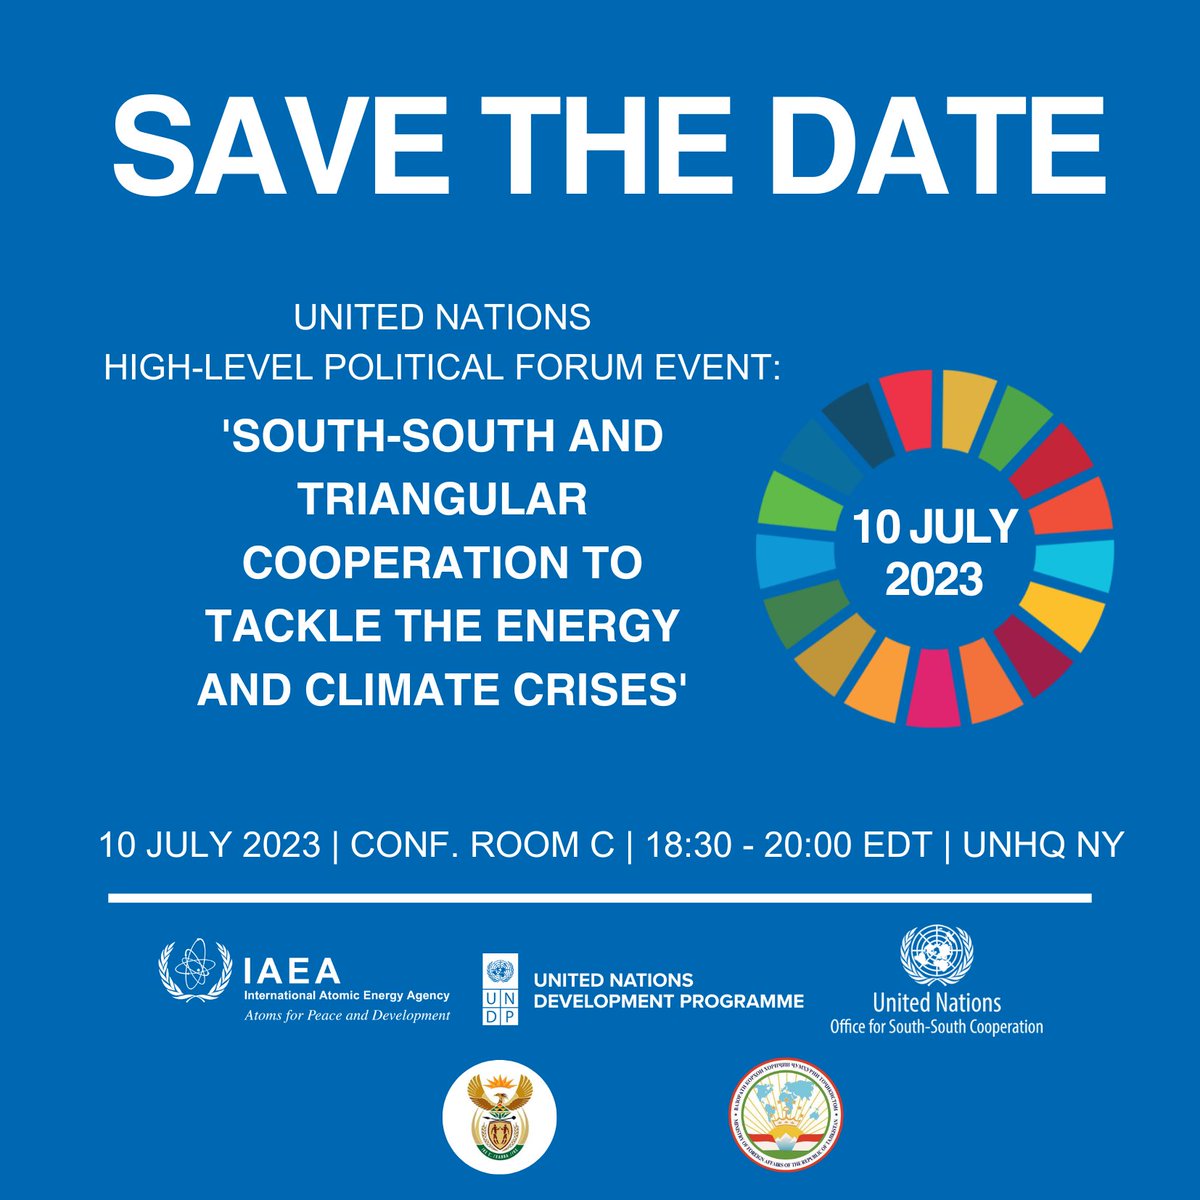 📢 #HLPF 2023: #SouthSouth and #TriangularCooperation to Tackle the Energy and Climate Crises

🗓️ 10 July 2023, 18:30 NY time